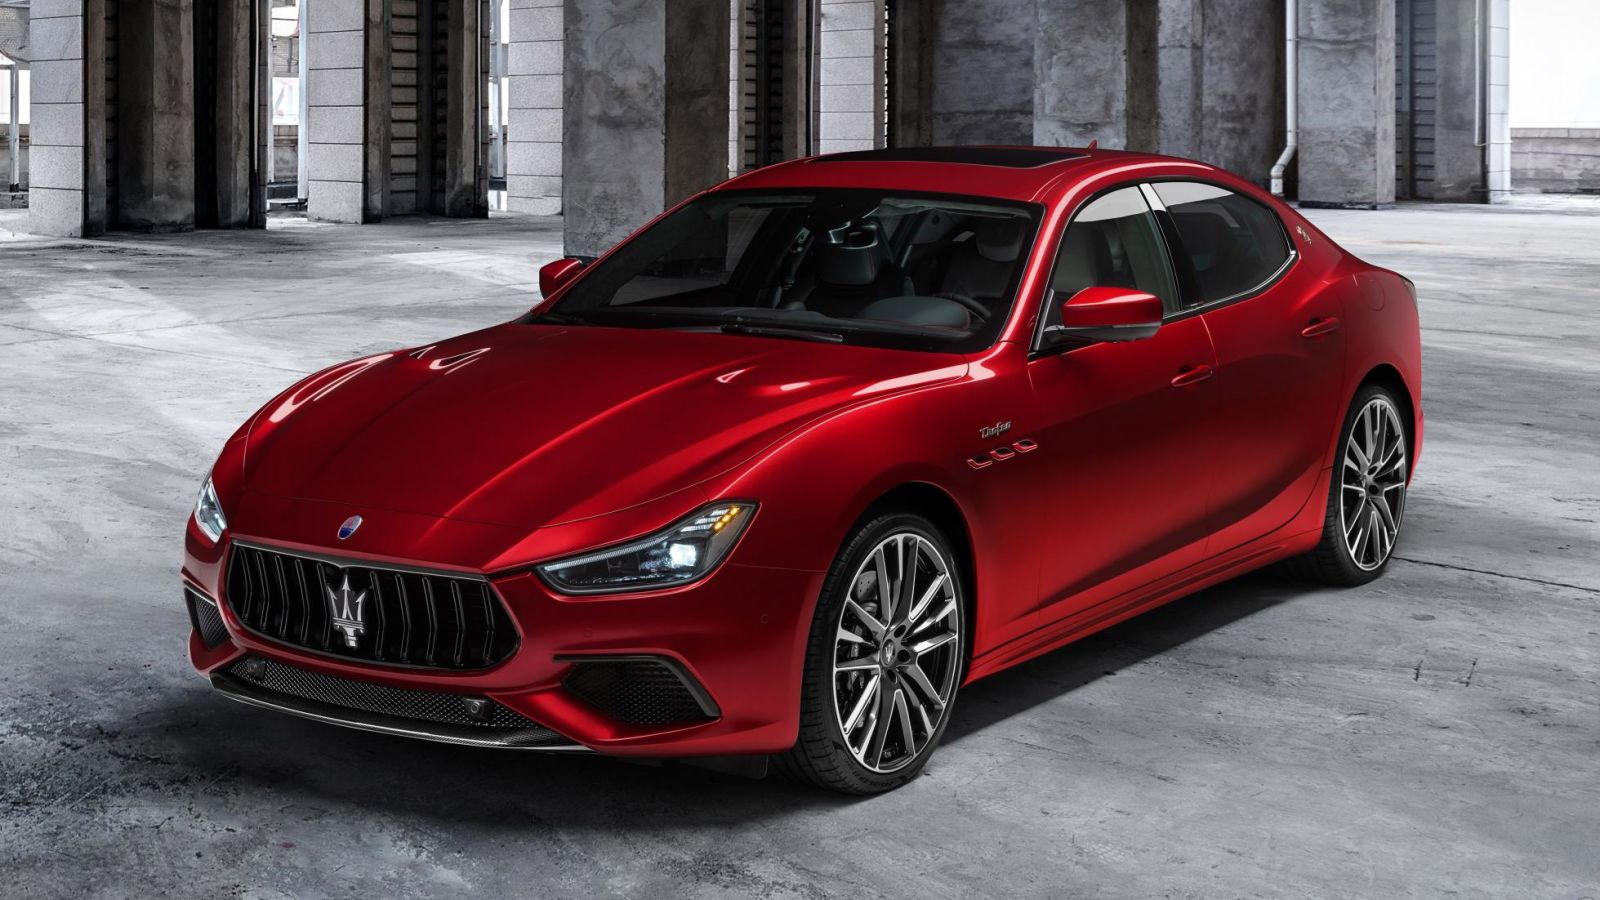 Illustration for article titled Maserati Finally Makes The Ghibli Good.